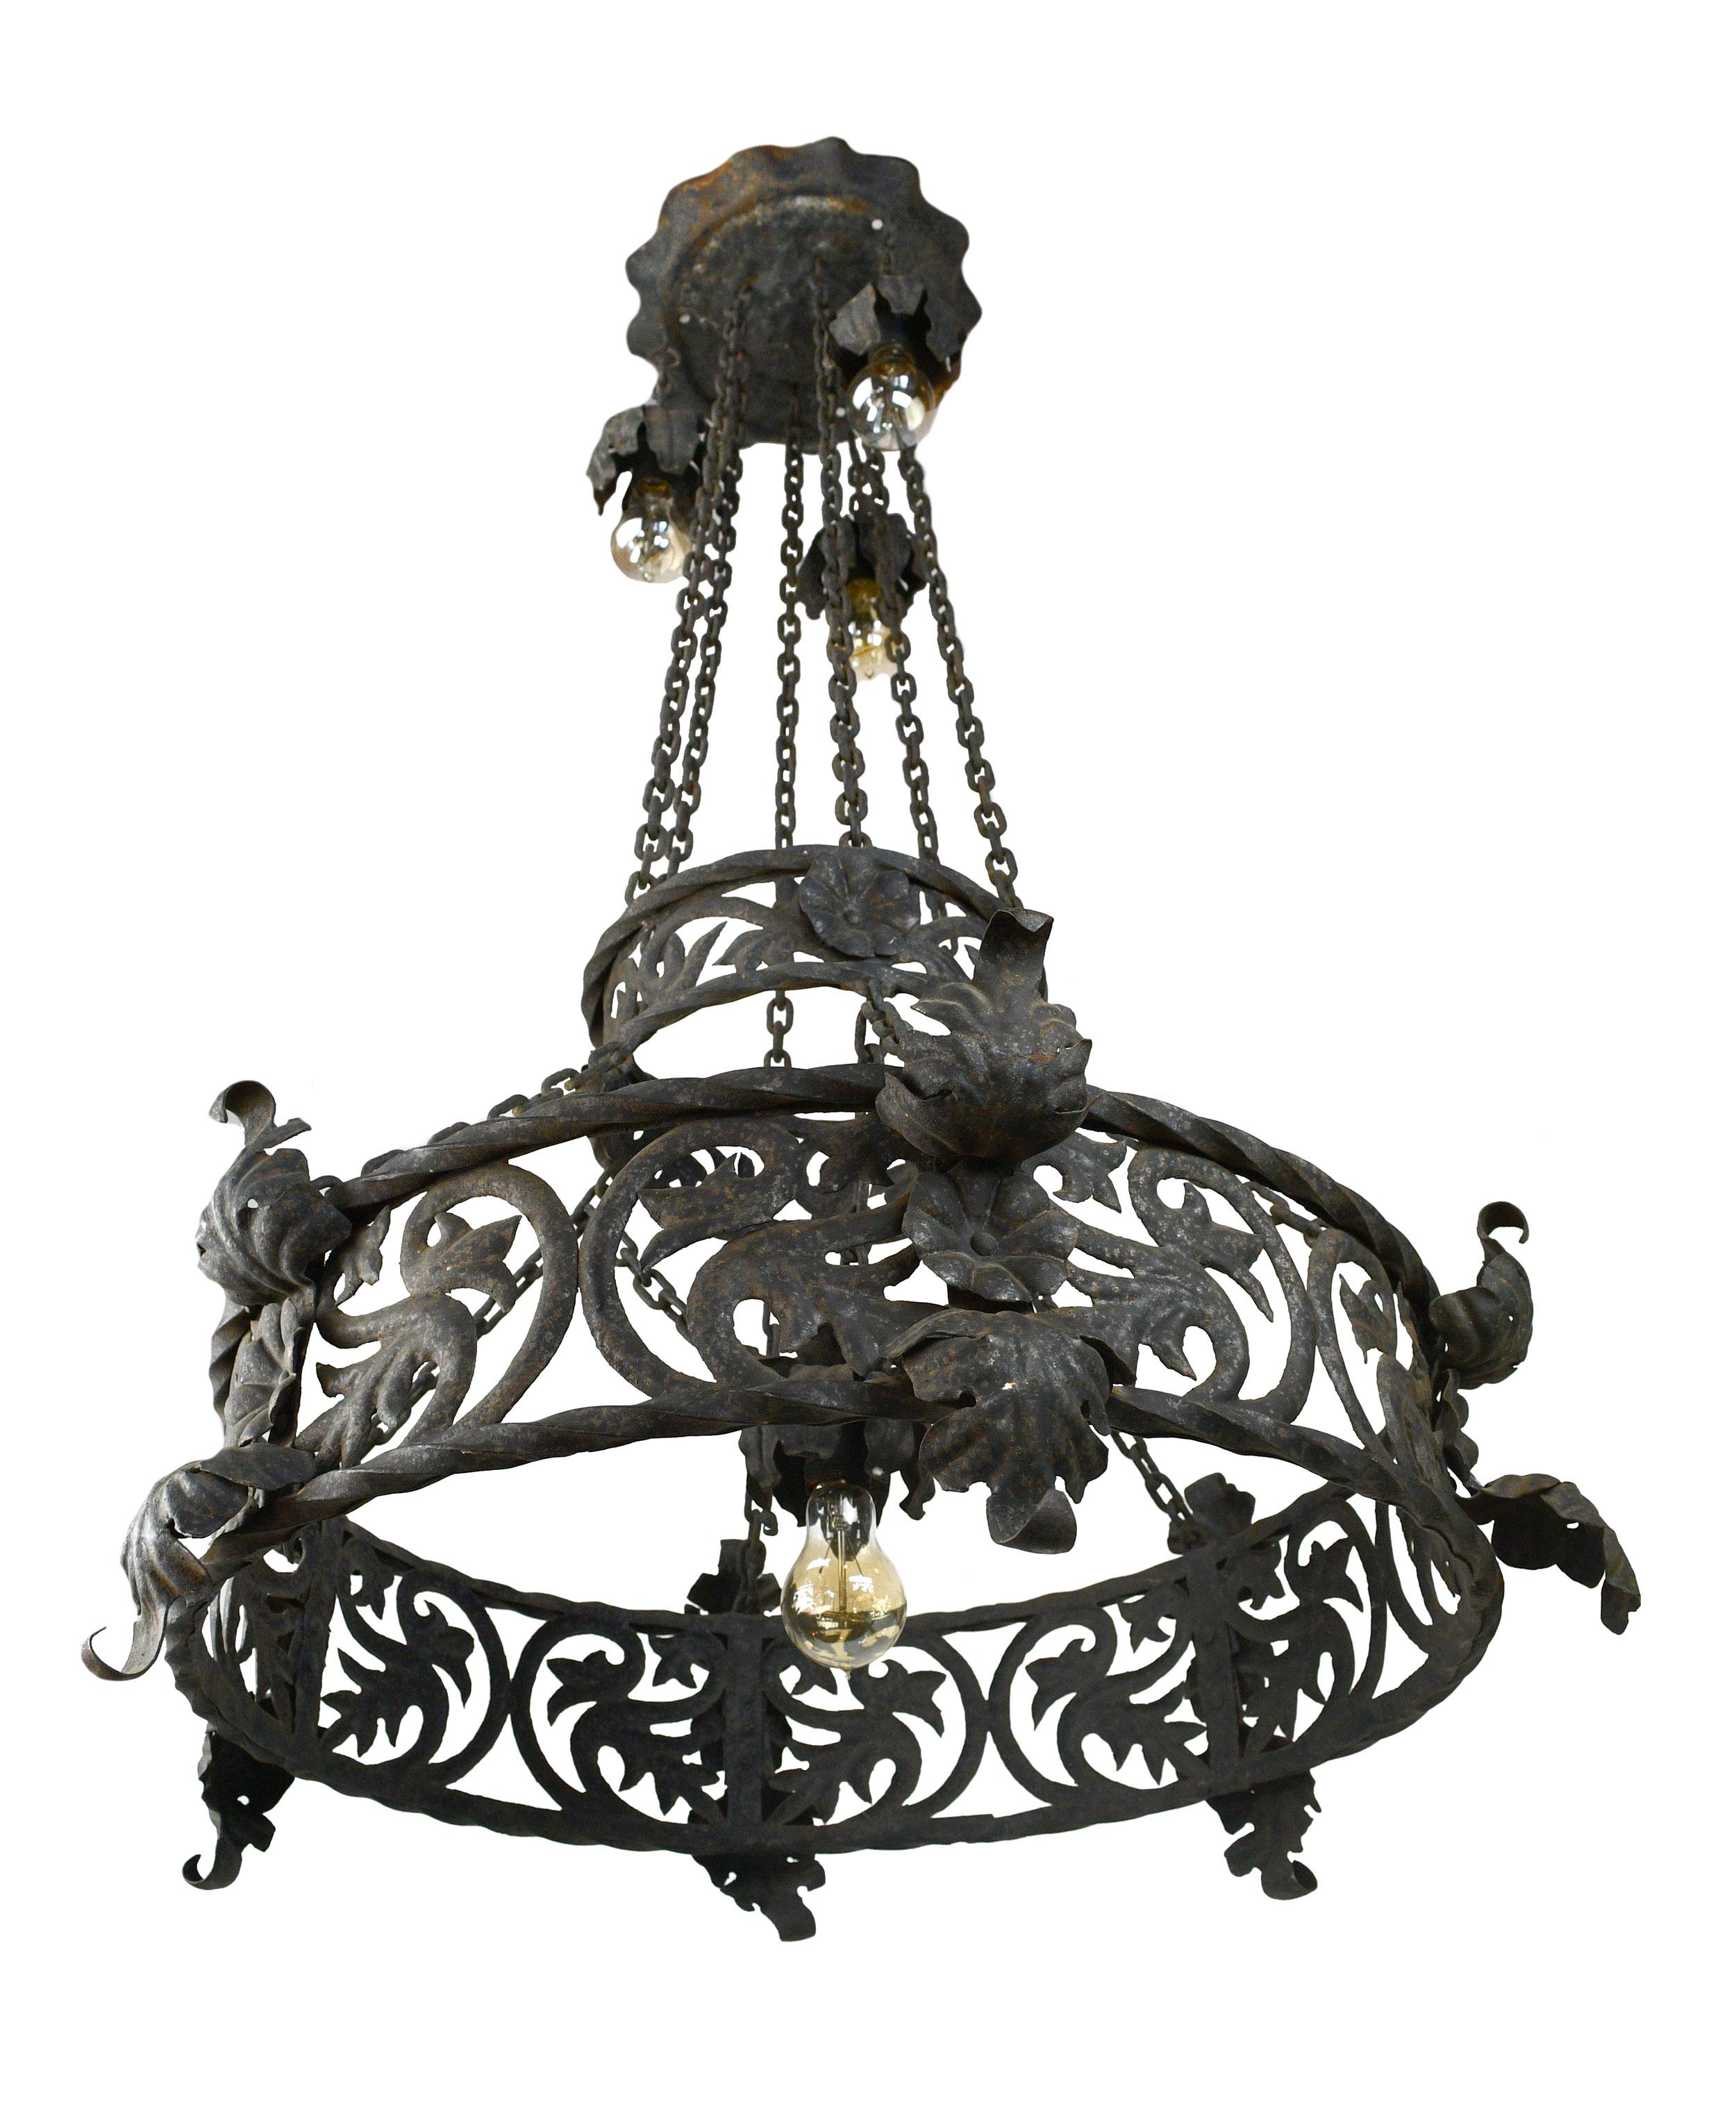 This chandelier is incredible because of the dedication to simple details. Every piece of iron on this chandelier has been uniquely formed, no piece of metal is flat. Twisted iron rings provide structure to the curved ornamentation of flowers and